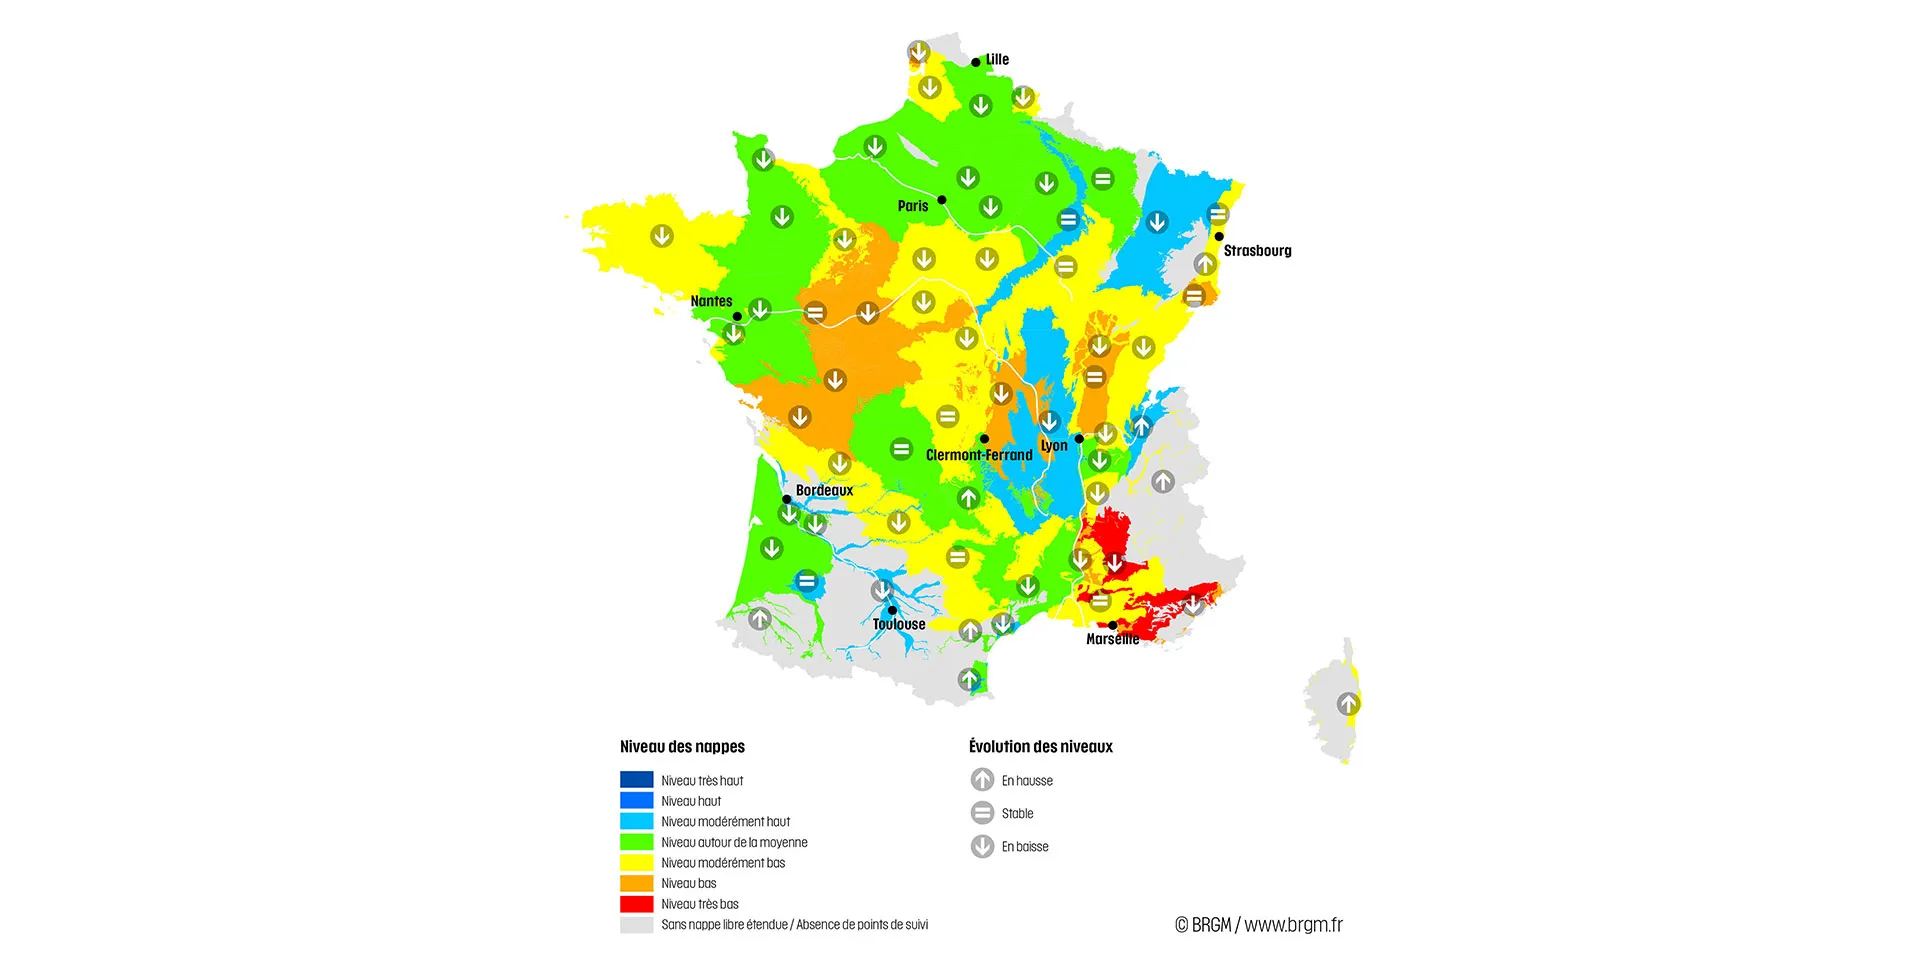 Map of France showing the state of the aquifers on 1 May 2022.